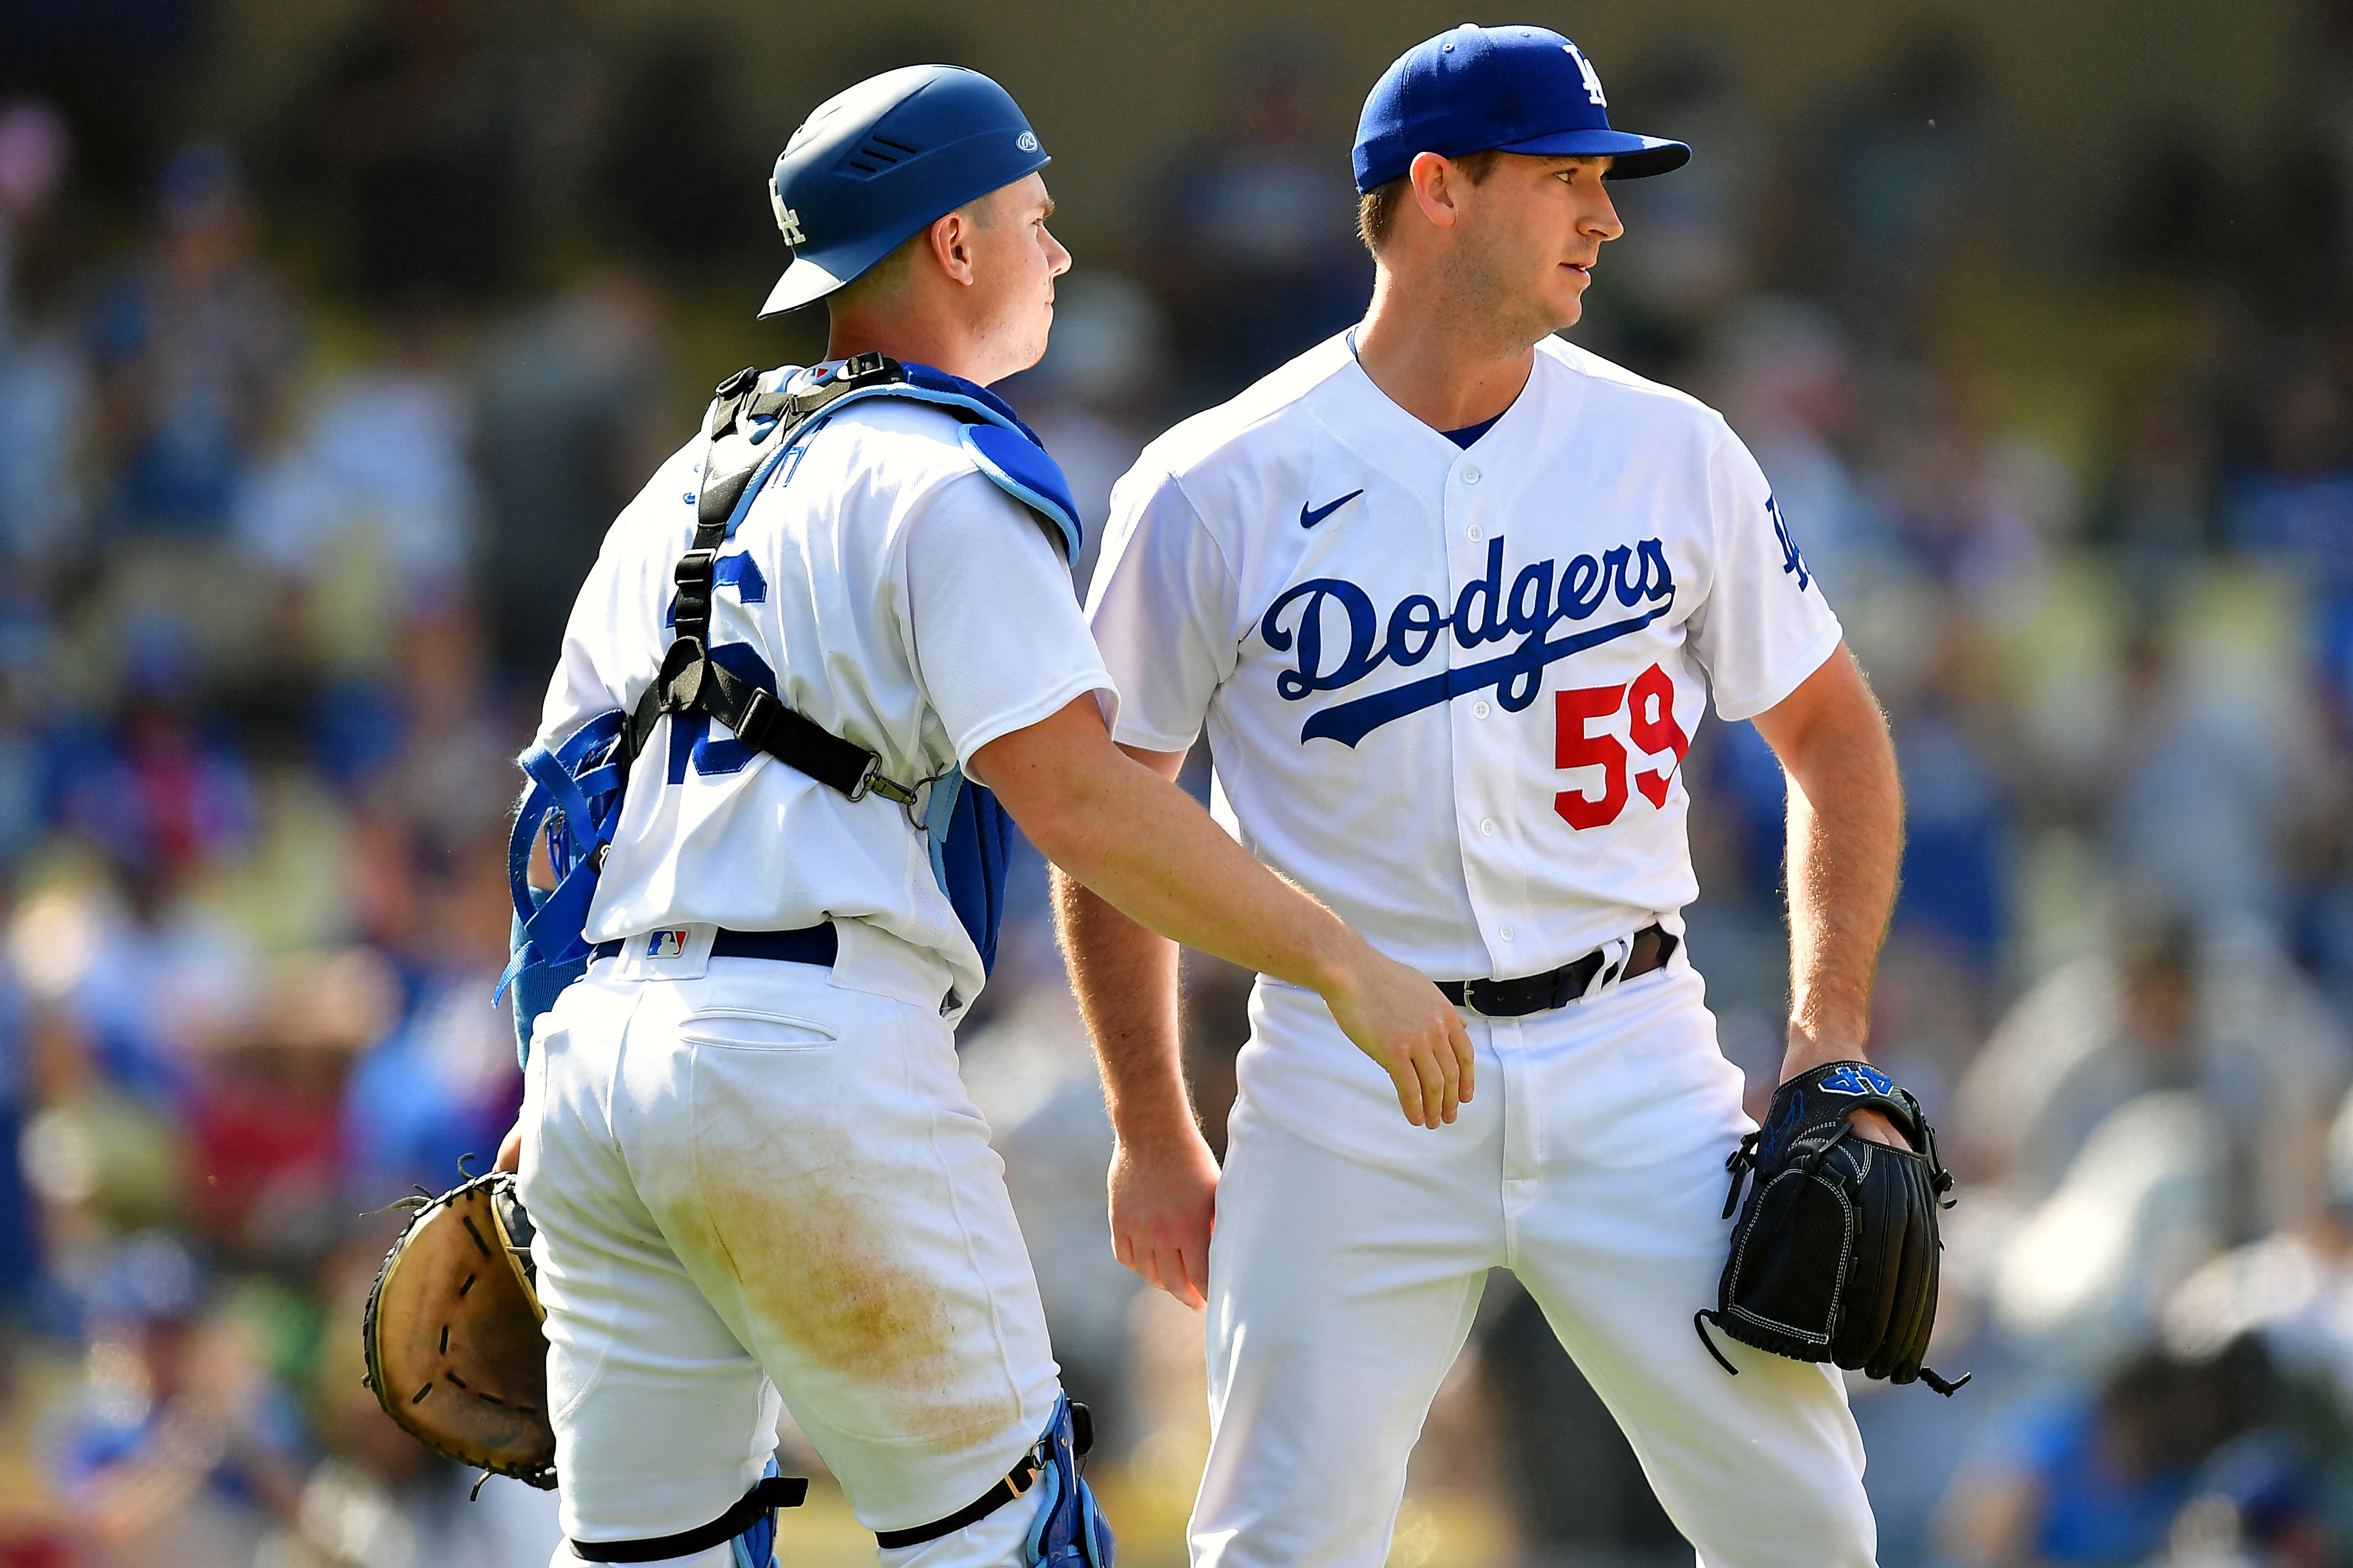 Dodgers swept by Cardinals in four-game series